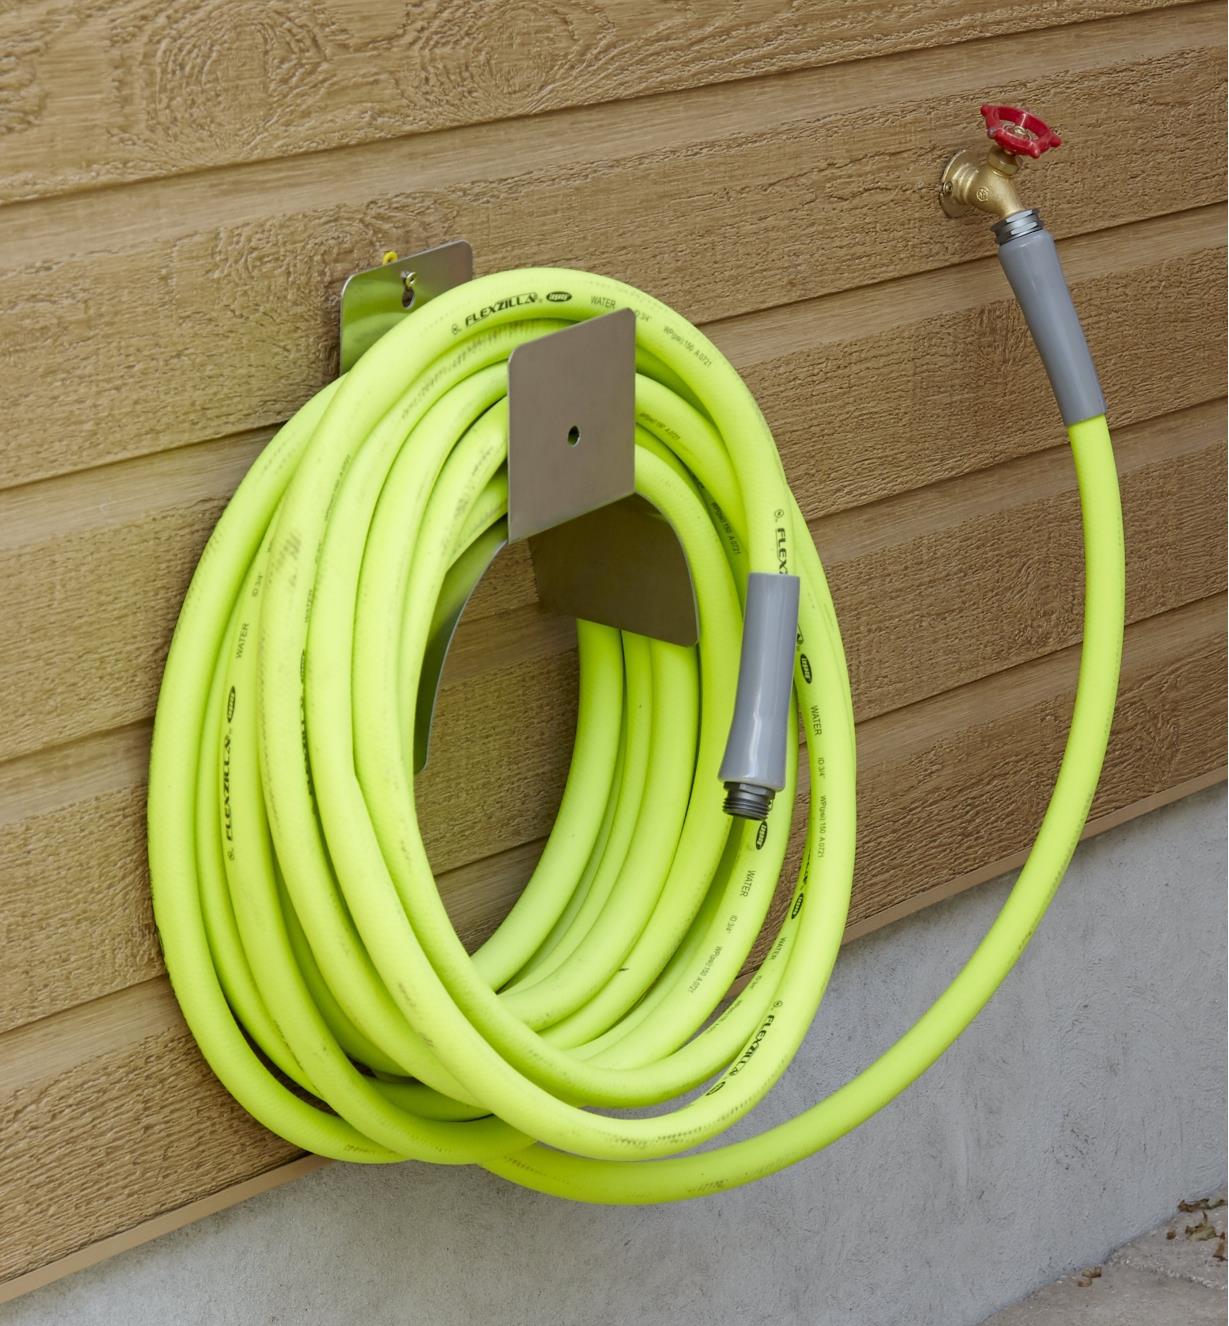 A 50' hose is coiled and hanging on an outdoor wall